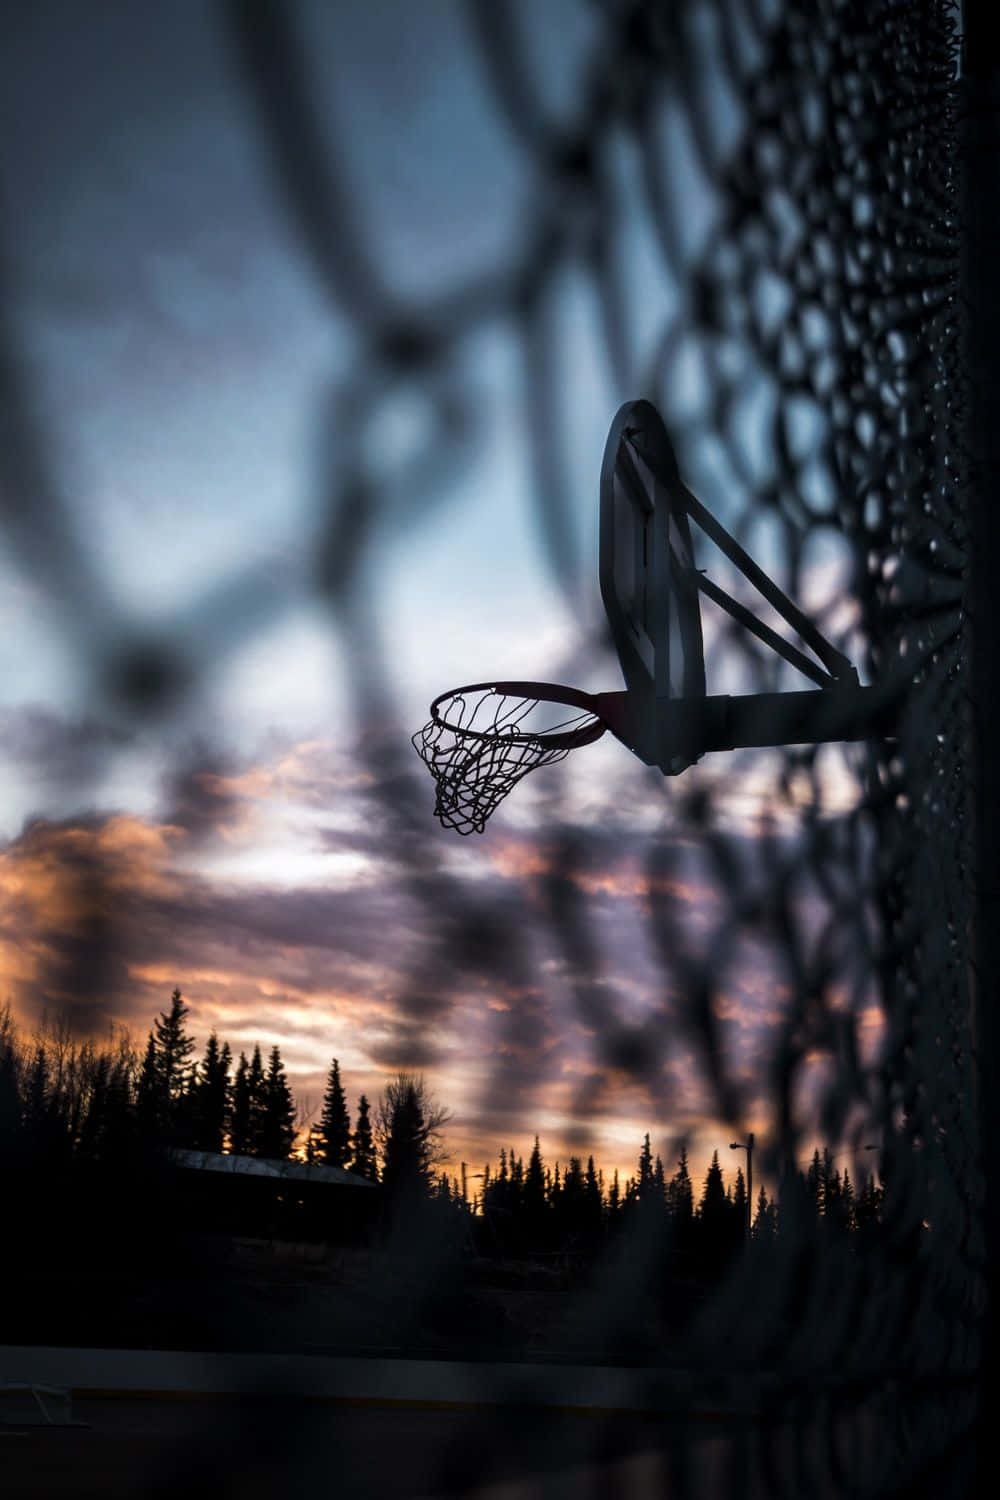 Best Basketball Court With Rim Background